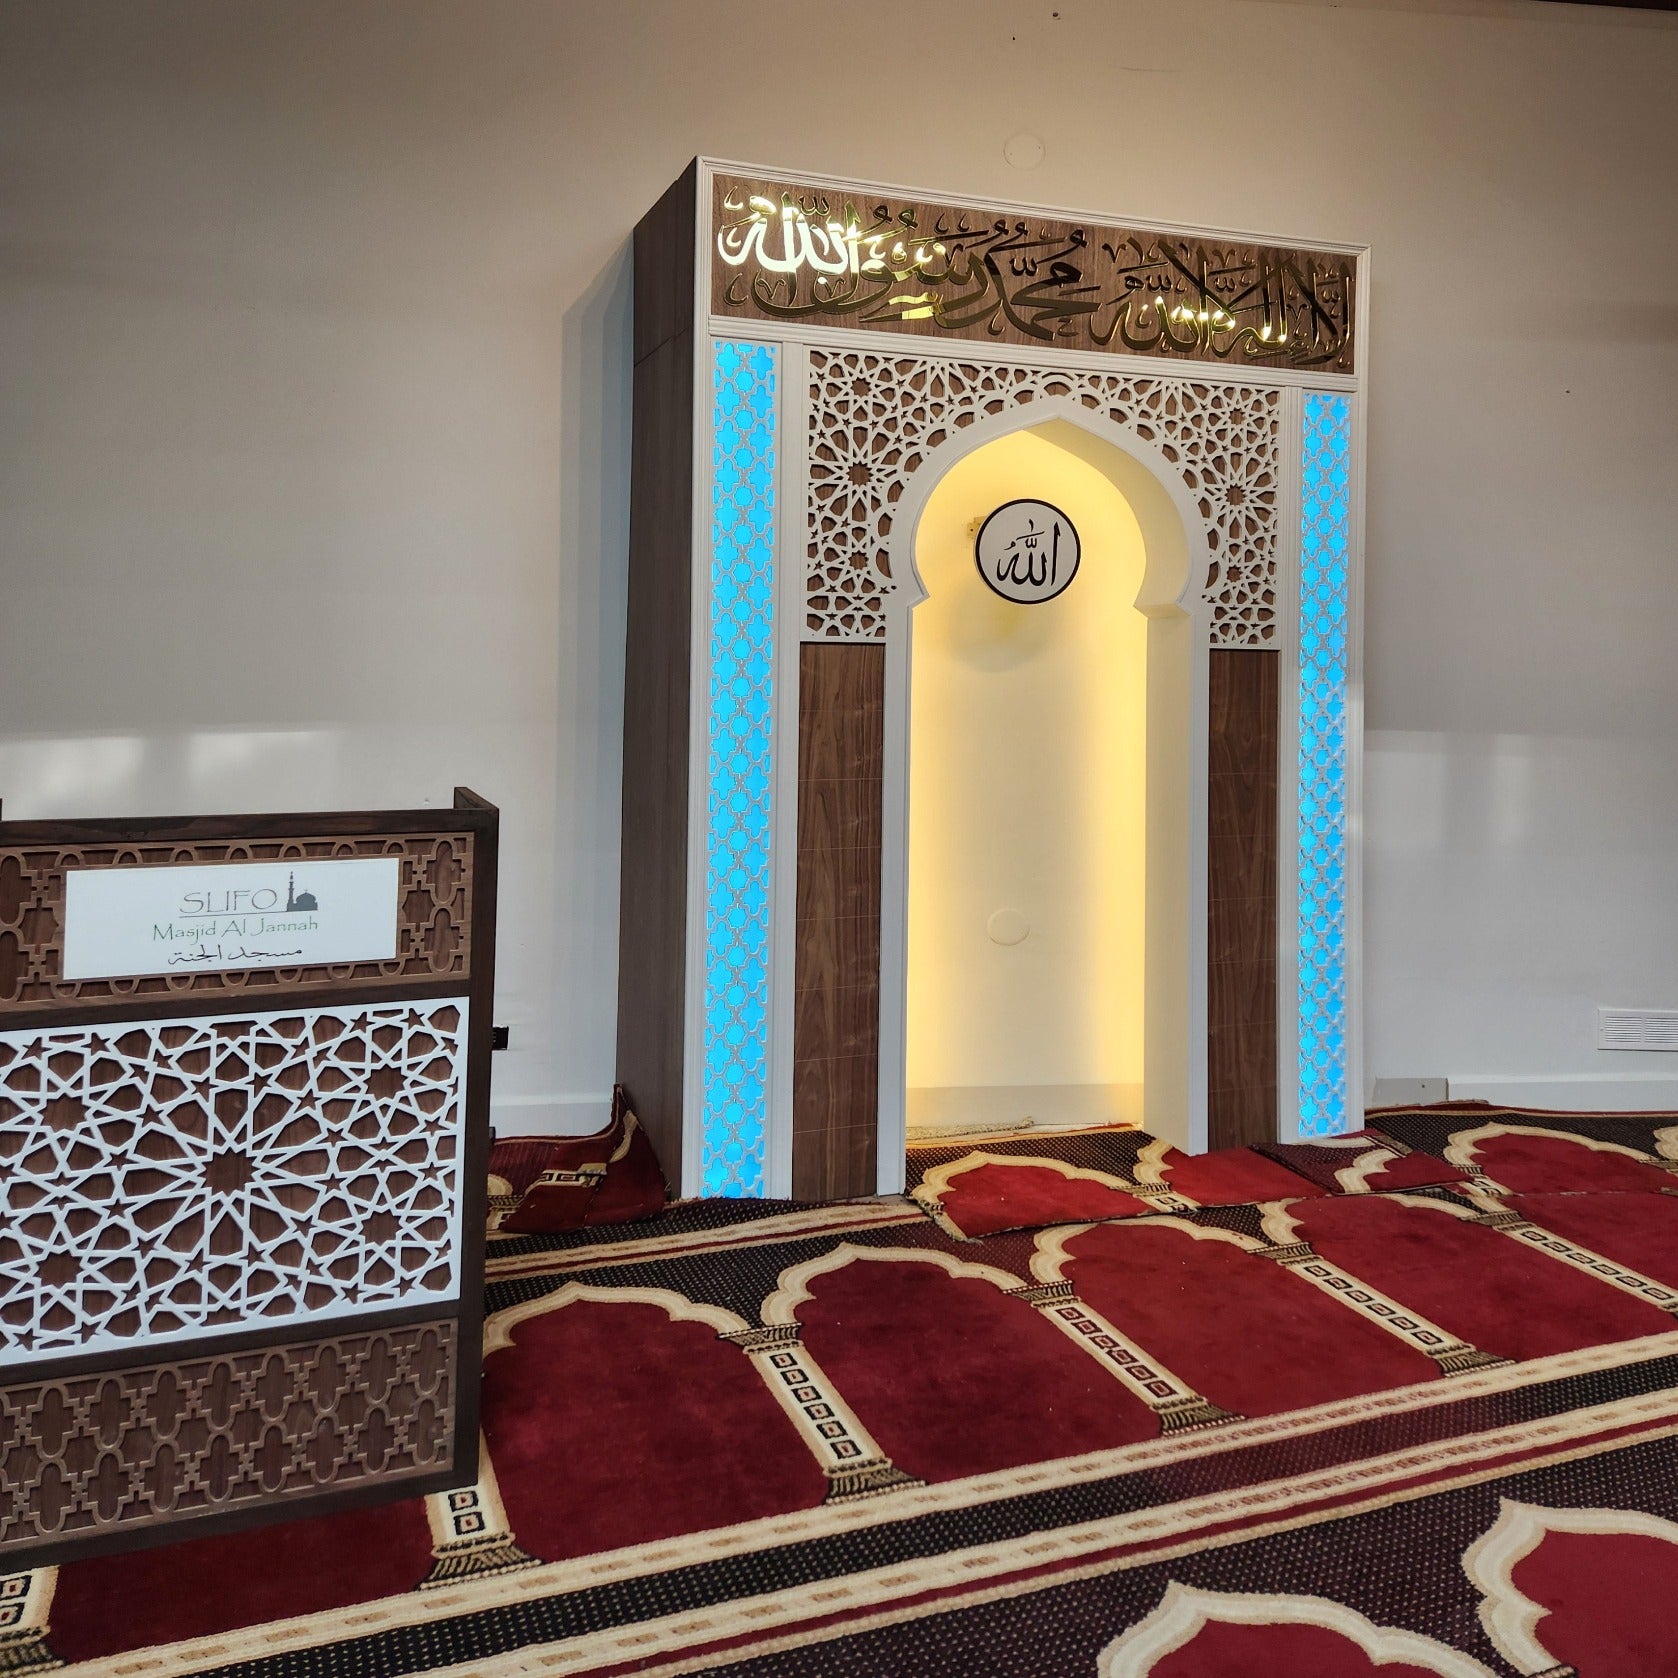 Mihrab, Islamic panels, Mosque partition, Mosque separator, custom panel, room divider, room dividers , craftivaart, Arc panel , Islamic divider, Islamic design, Masjid divider, mosque panel, Islamic room divider, Arc divider design, arc